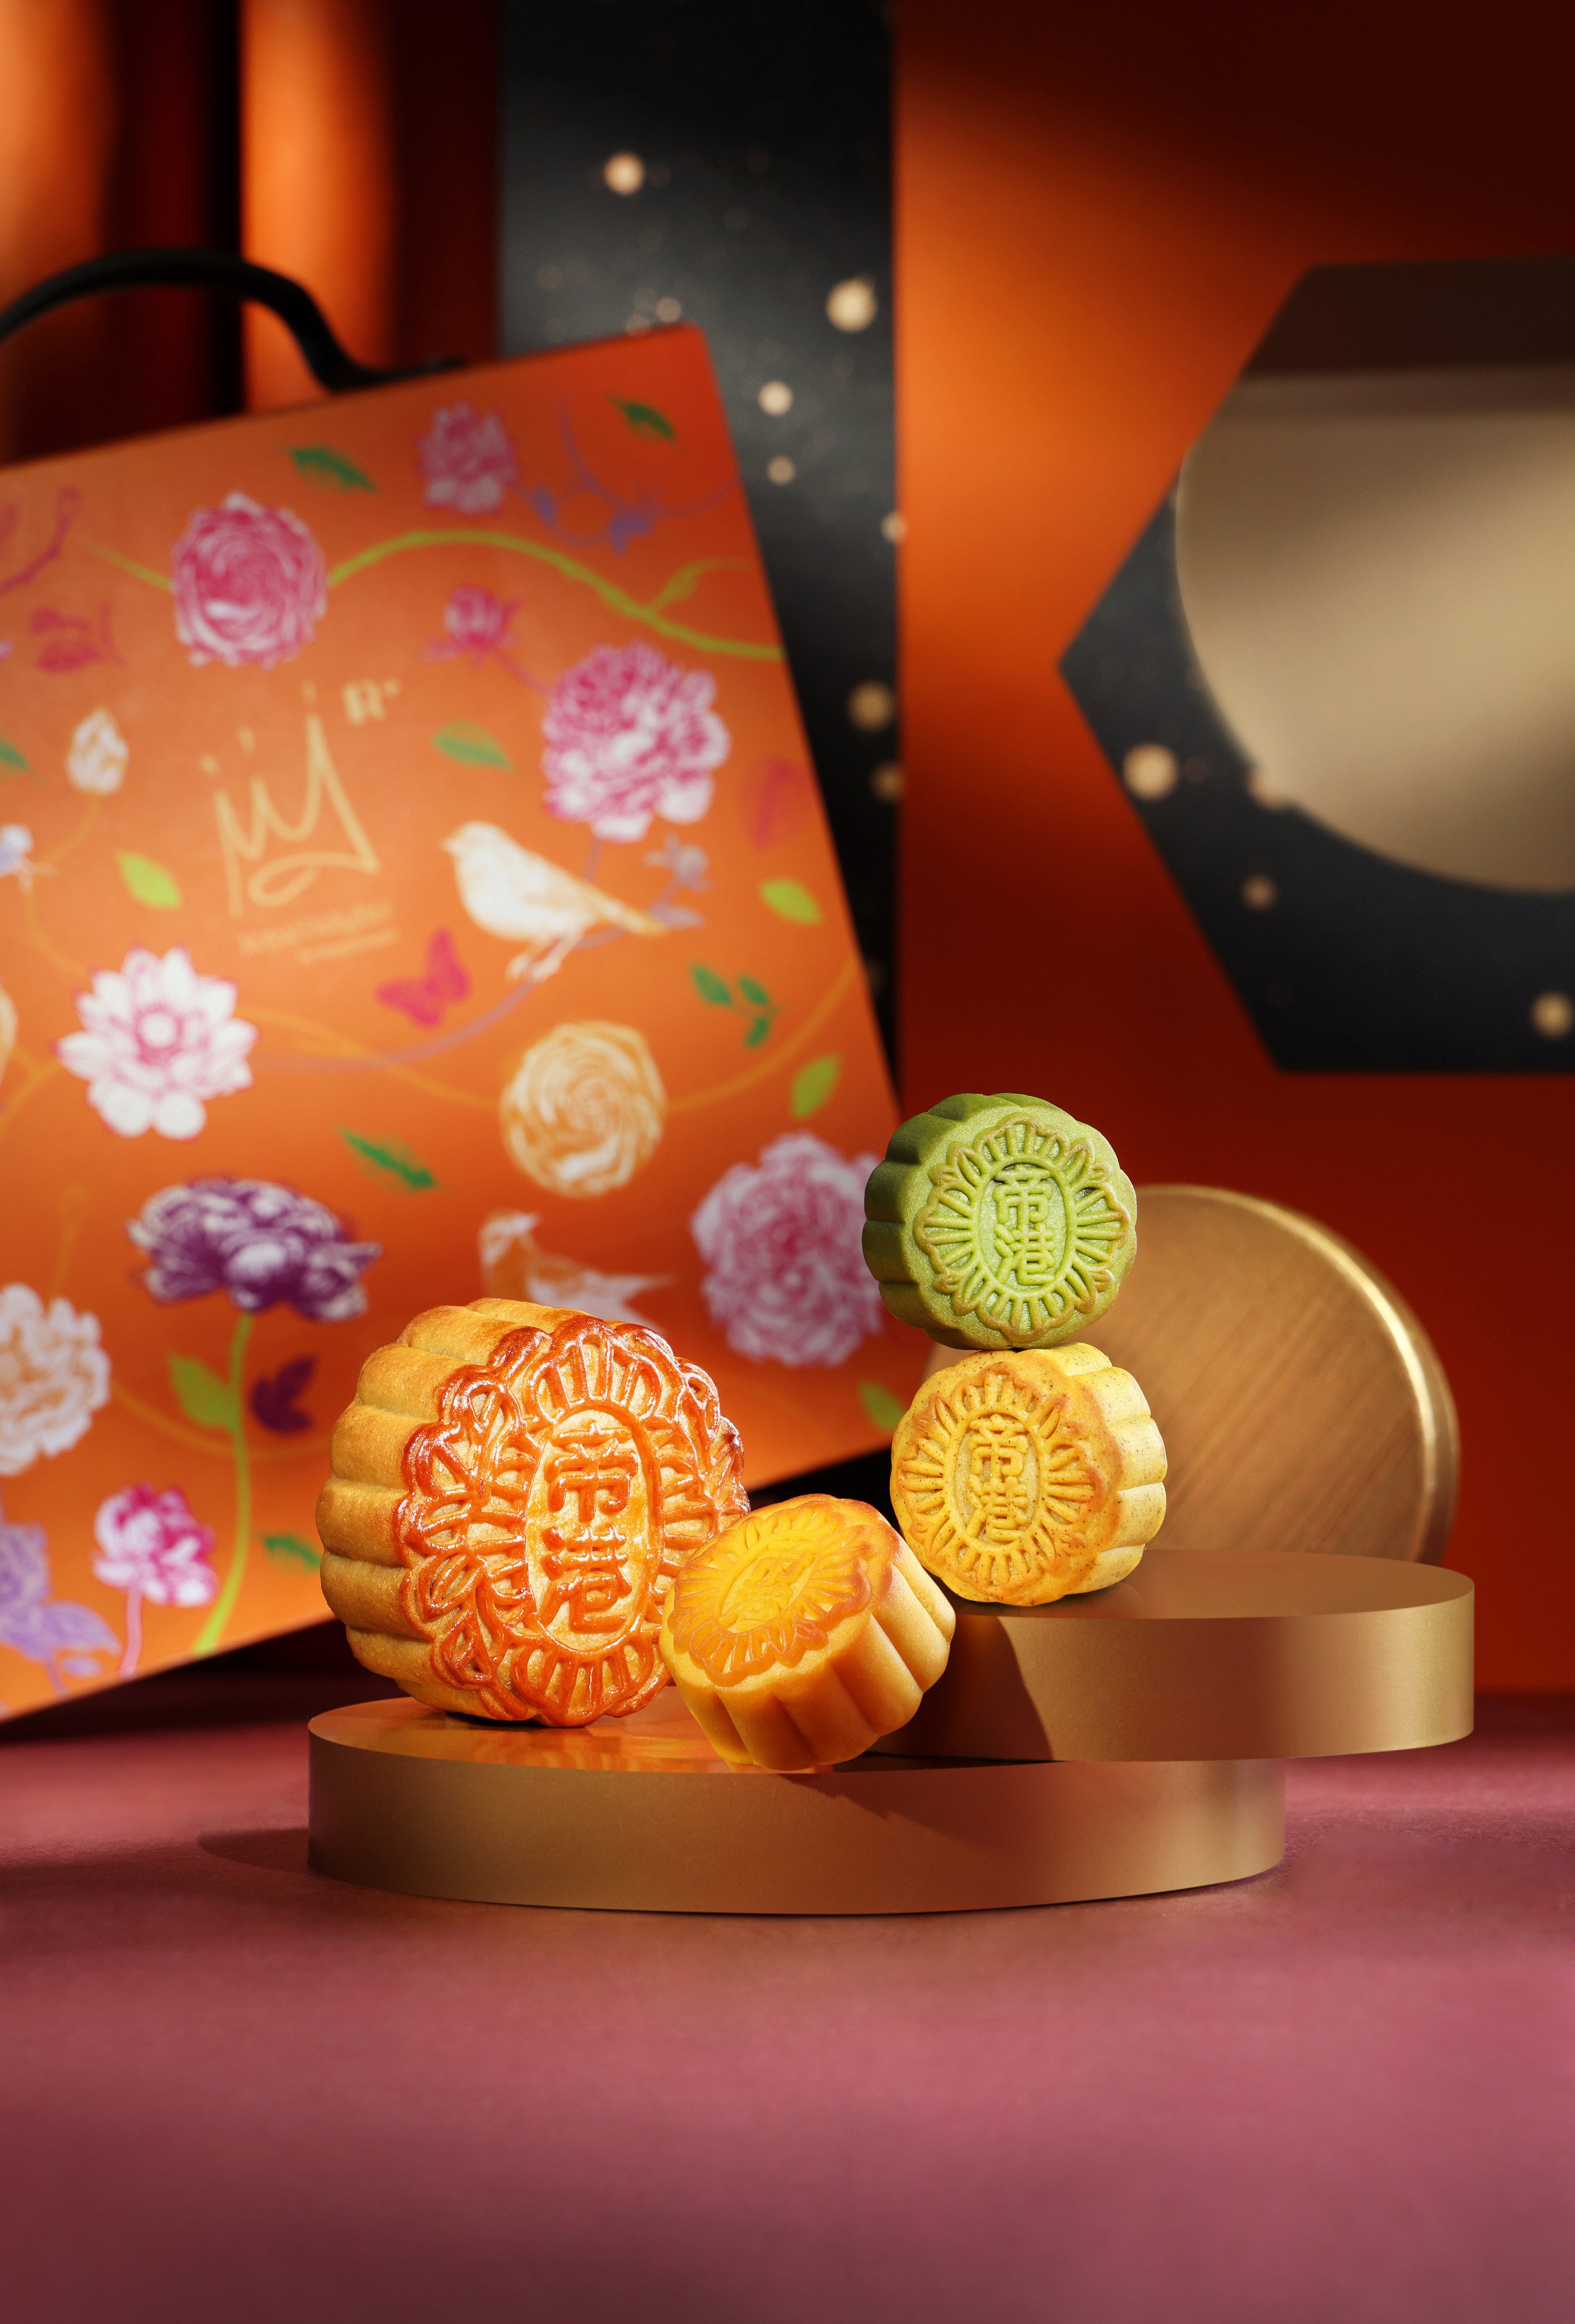 The Royal Plaza Hotel’s premium mooncake gift box includes eight varieties of mooncakes, featuring both classic and contemporary flavours. Photo: Handout